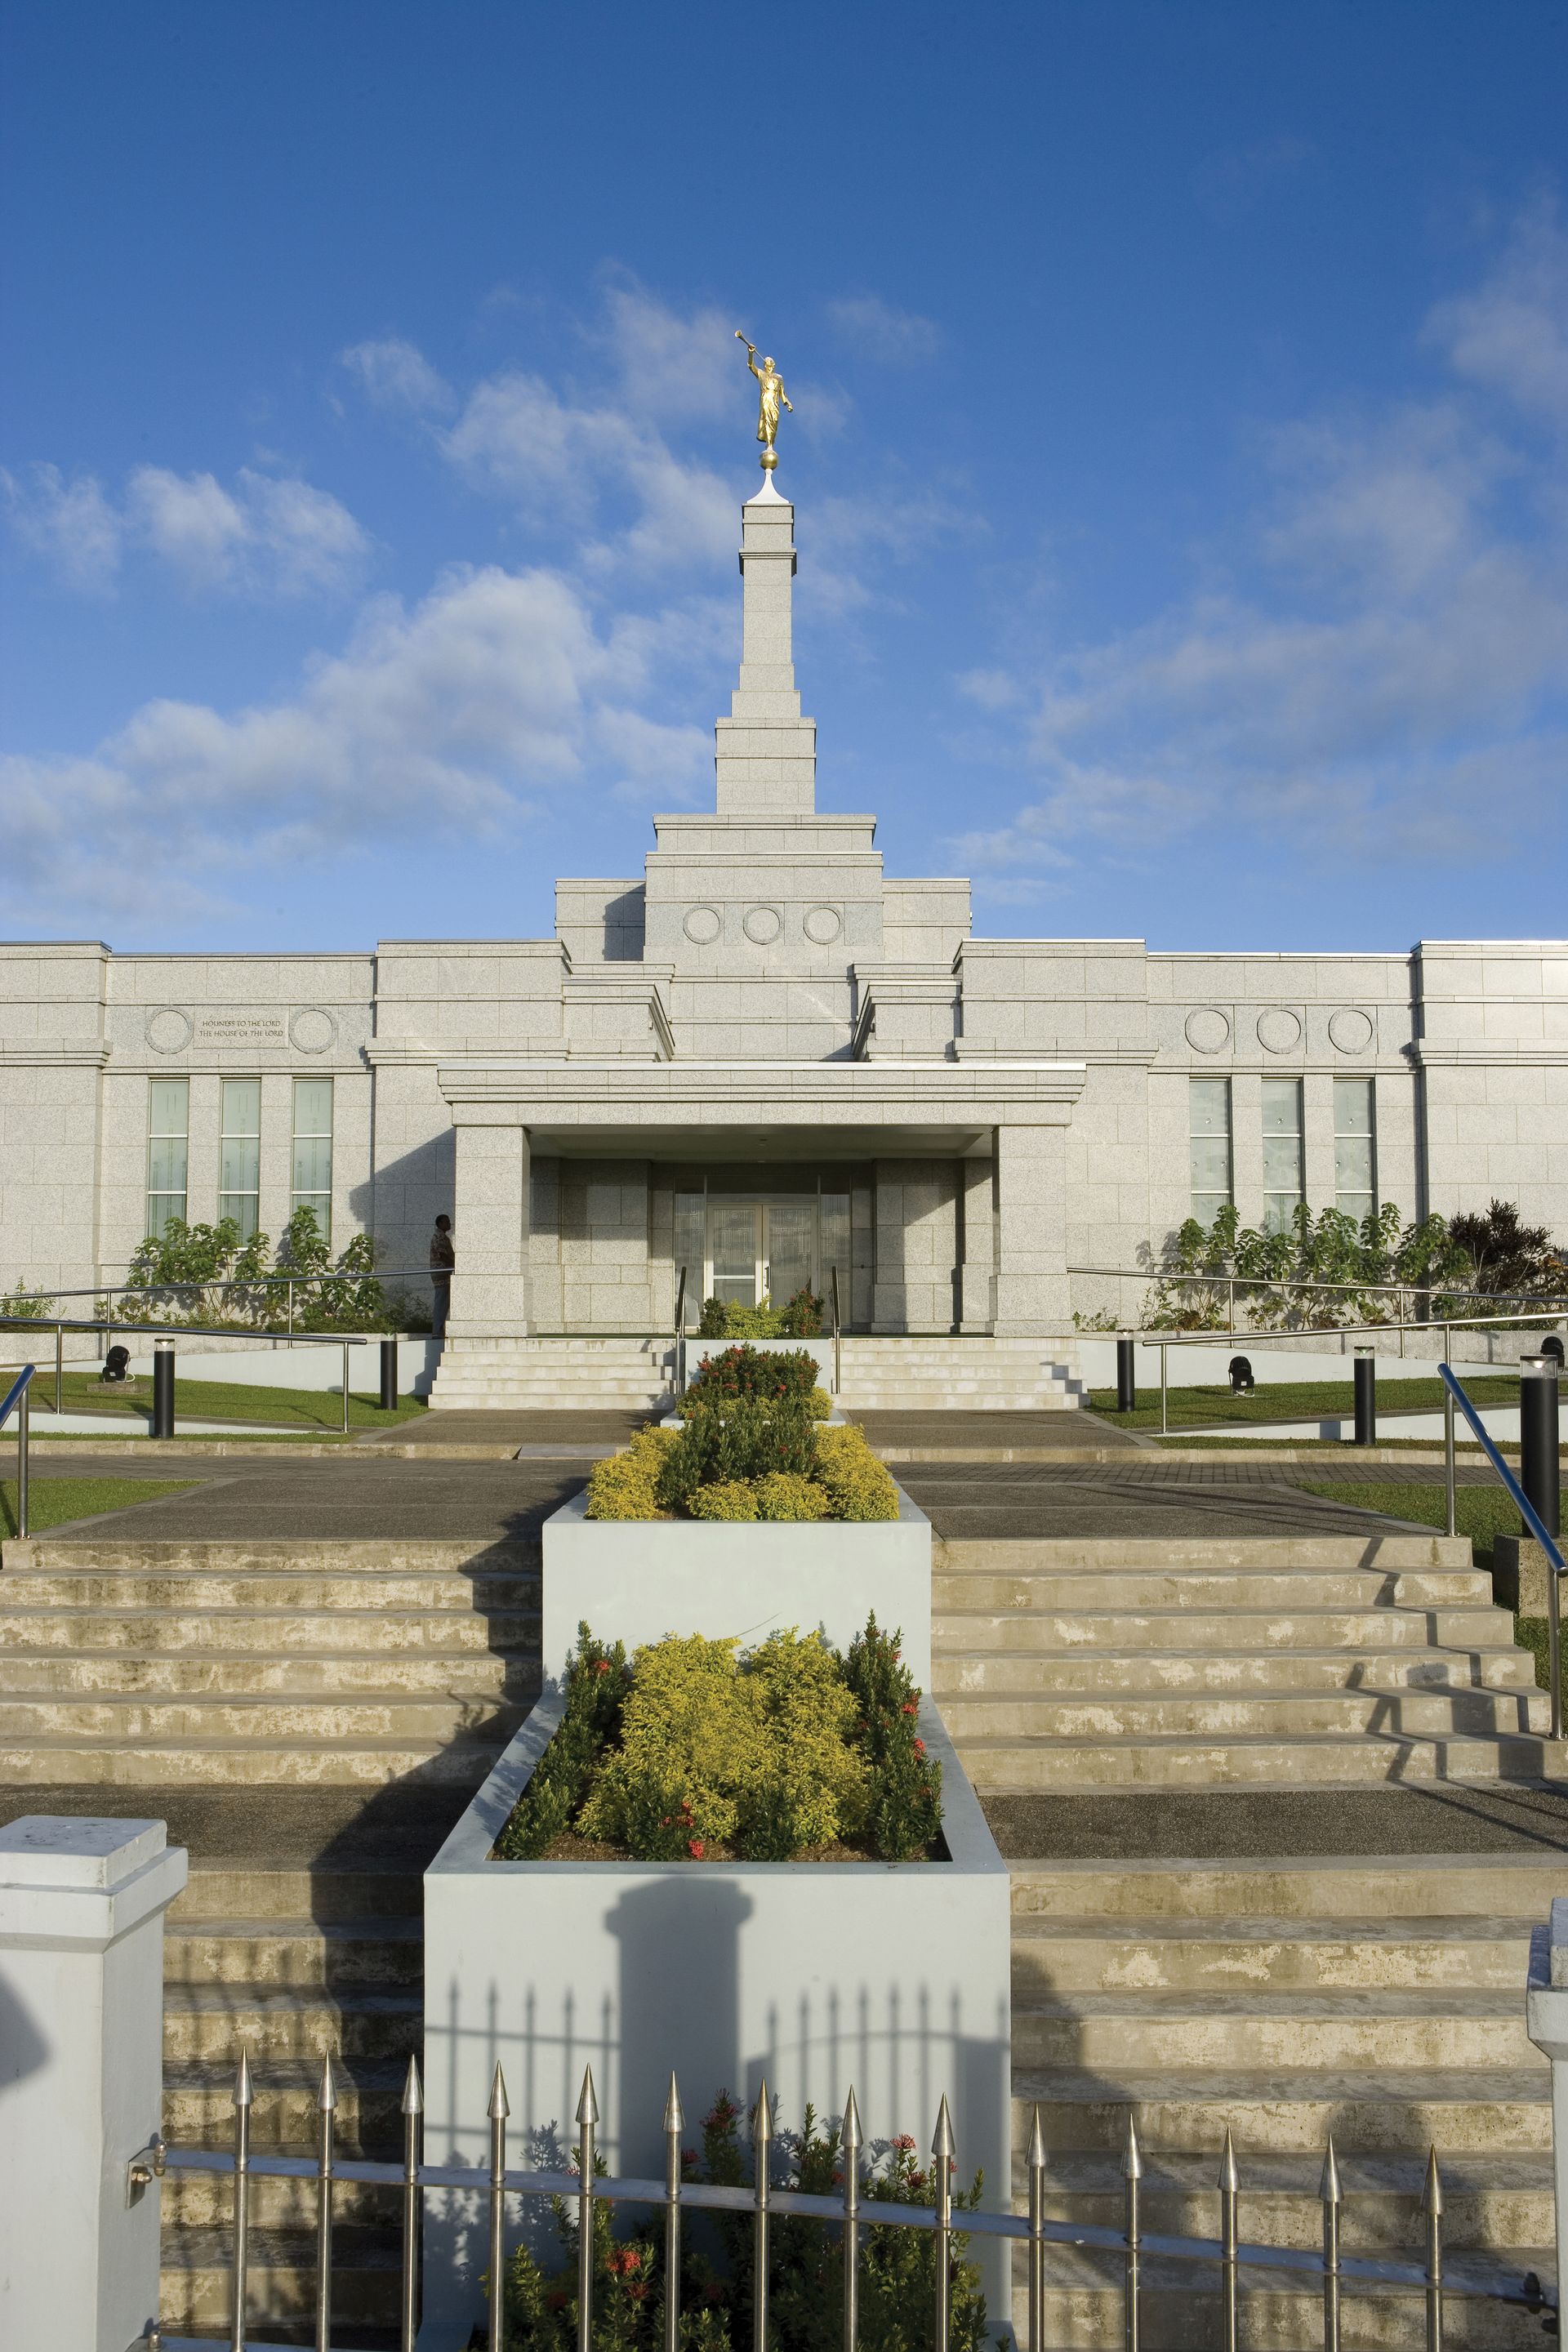 The Suva Fiji Temple, including the entrance and scenery.